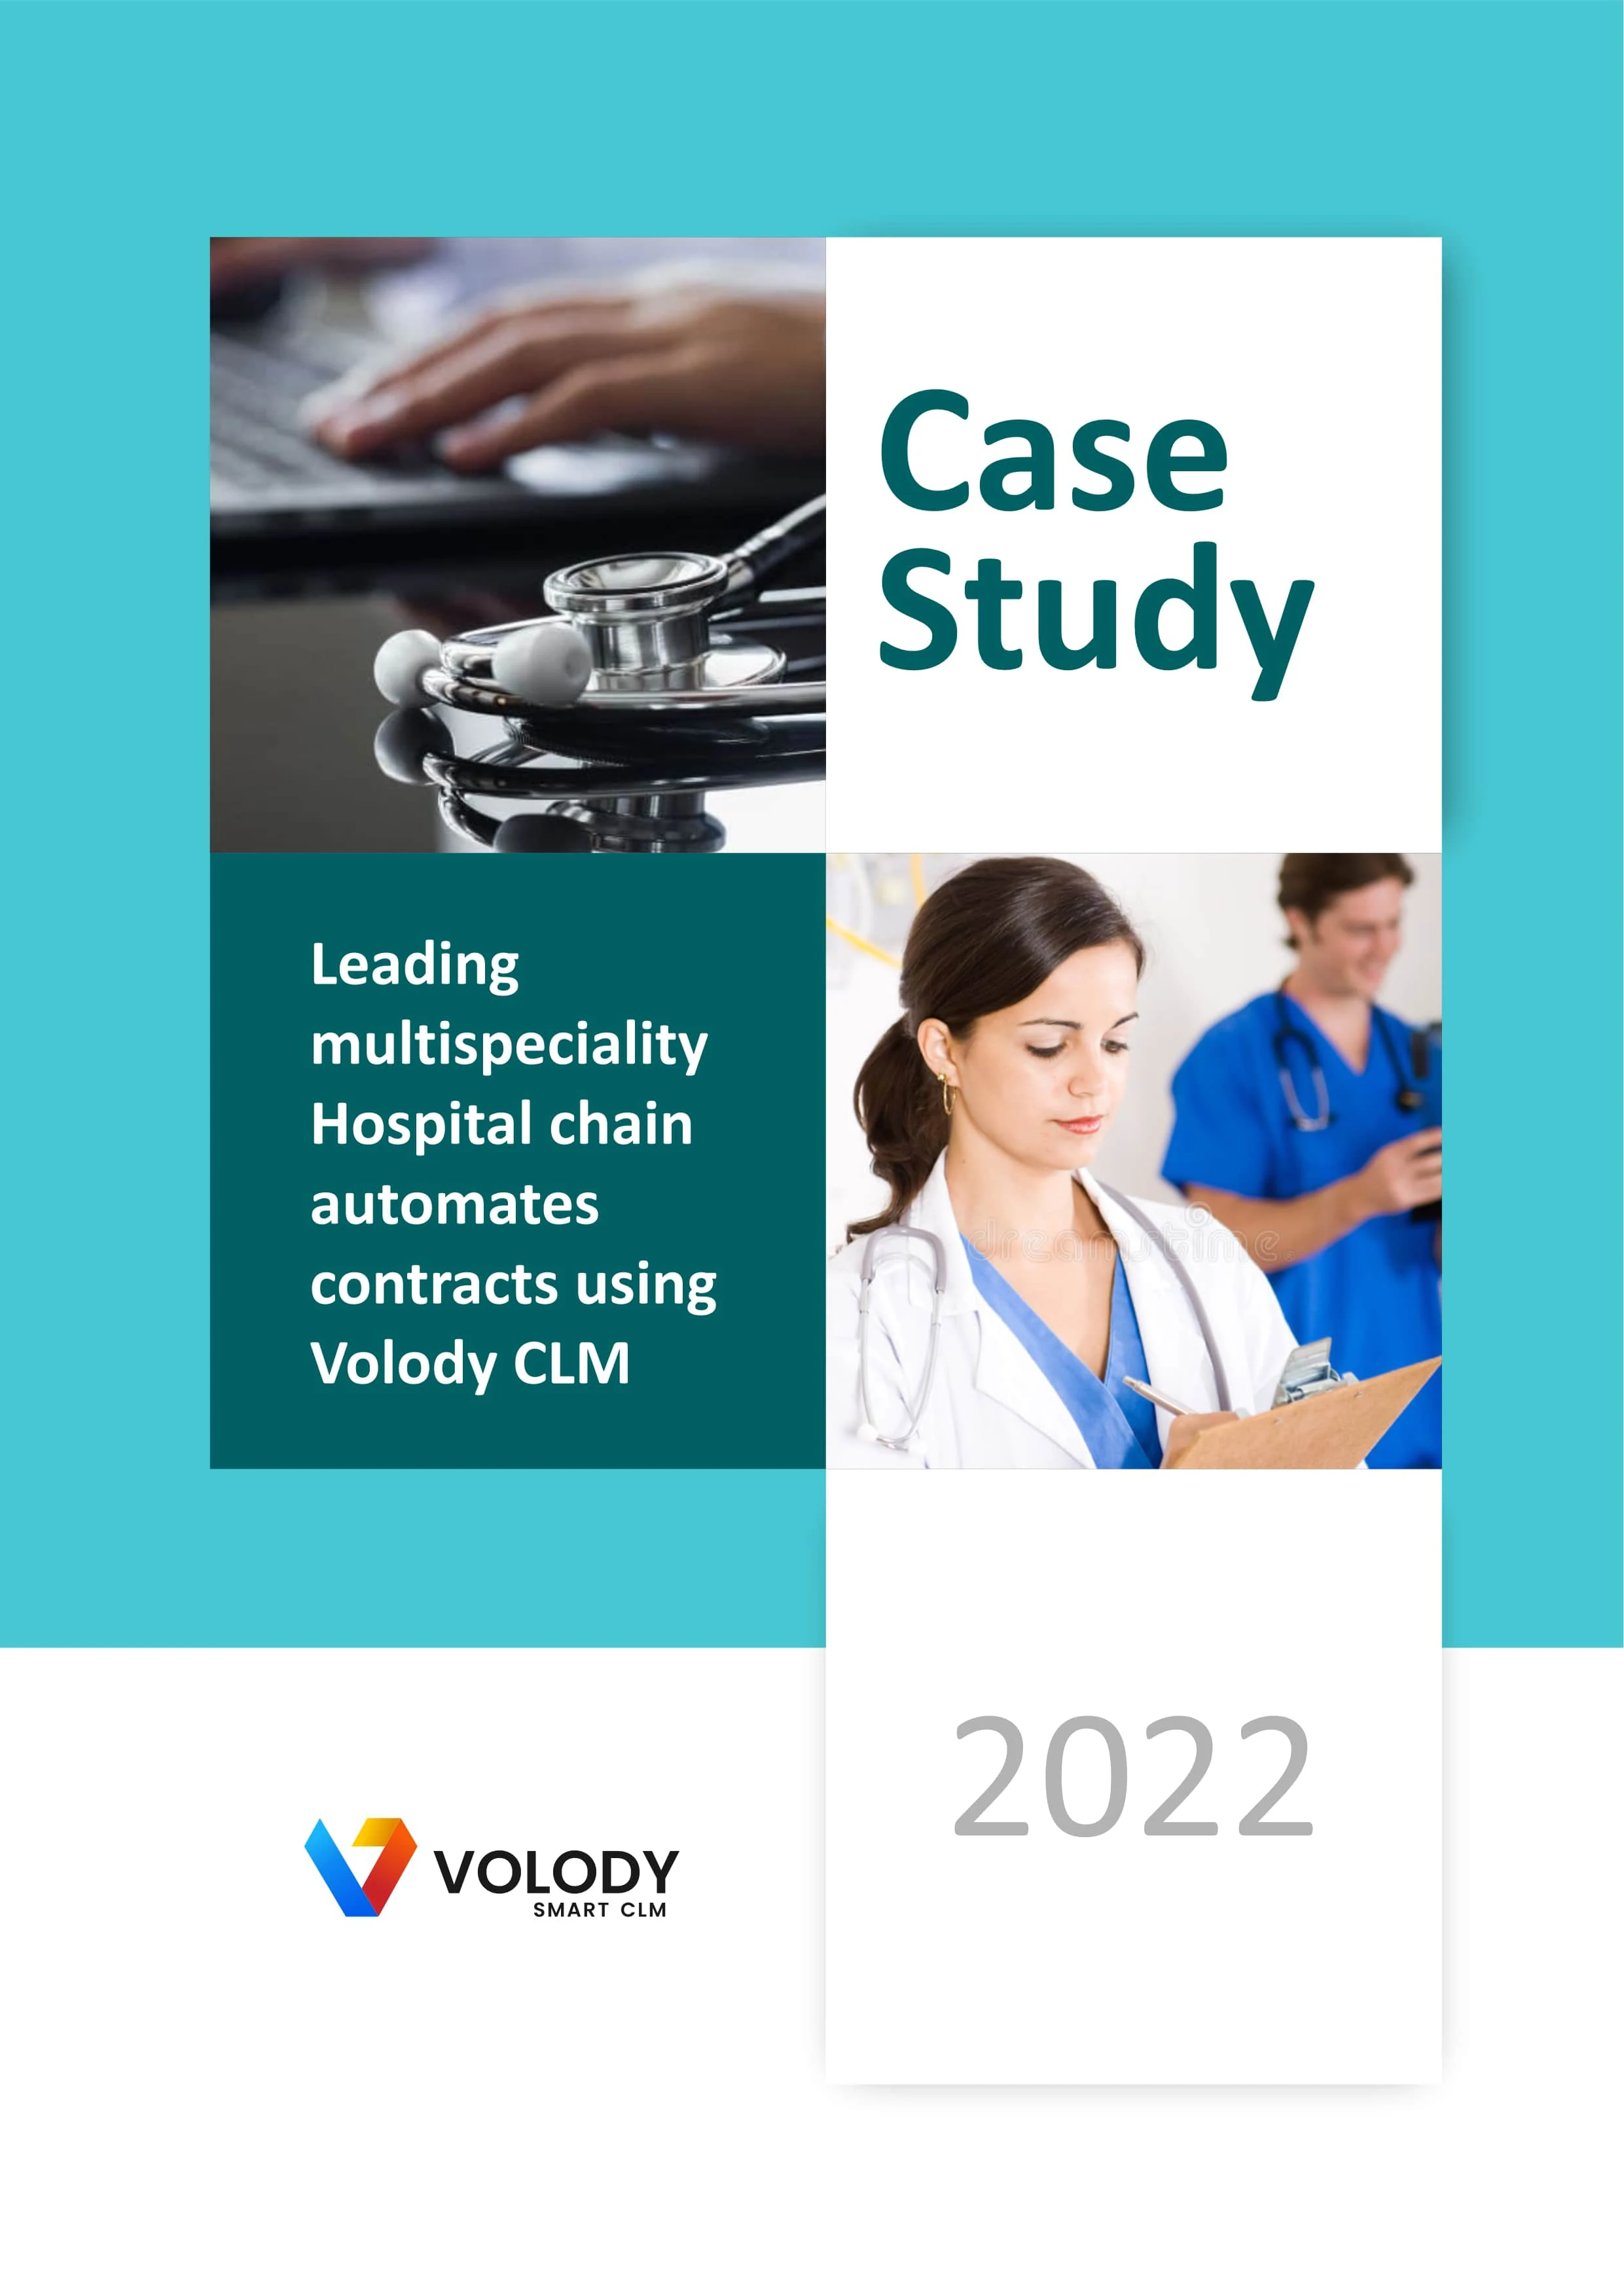 Leading multispeciality hospital chain automates contracts using volody clm